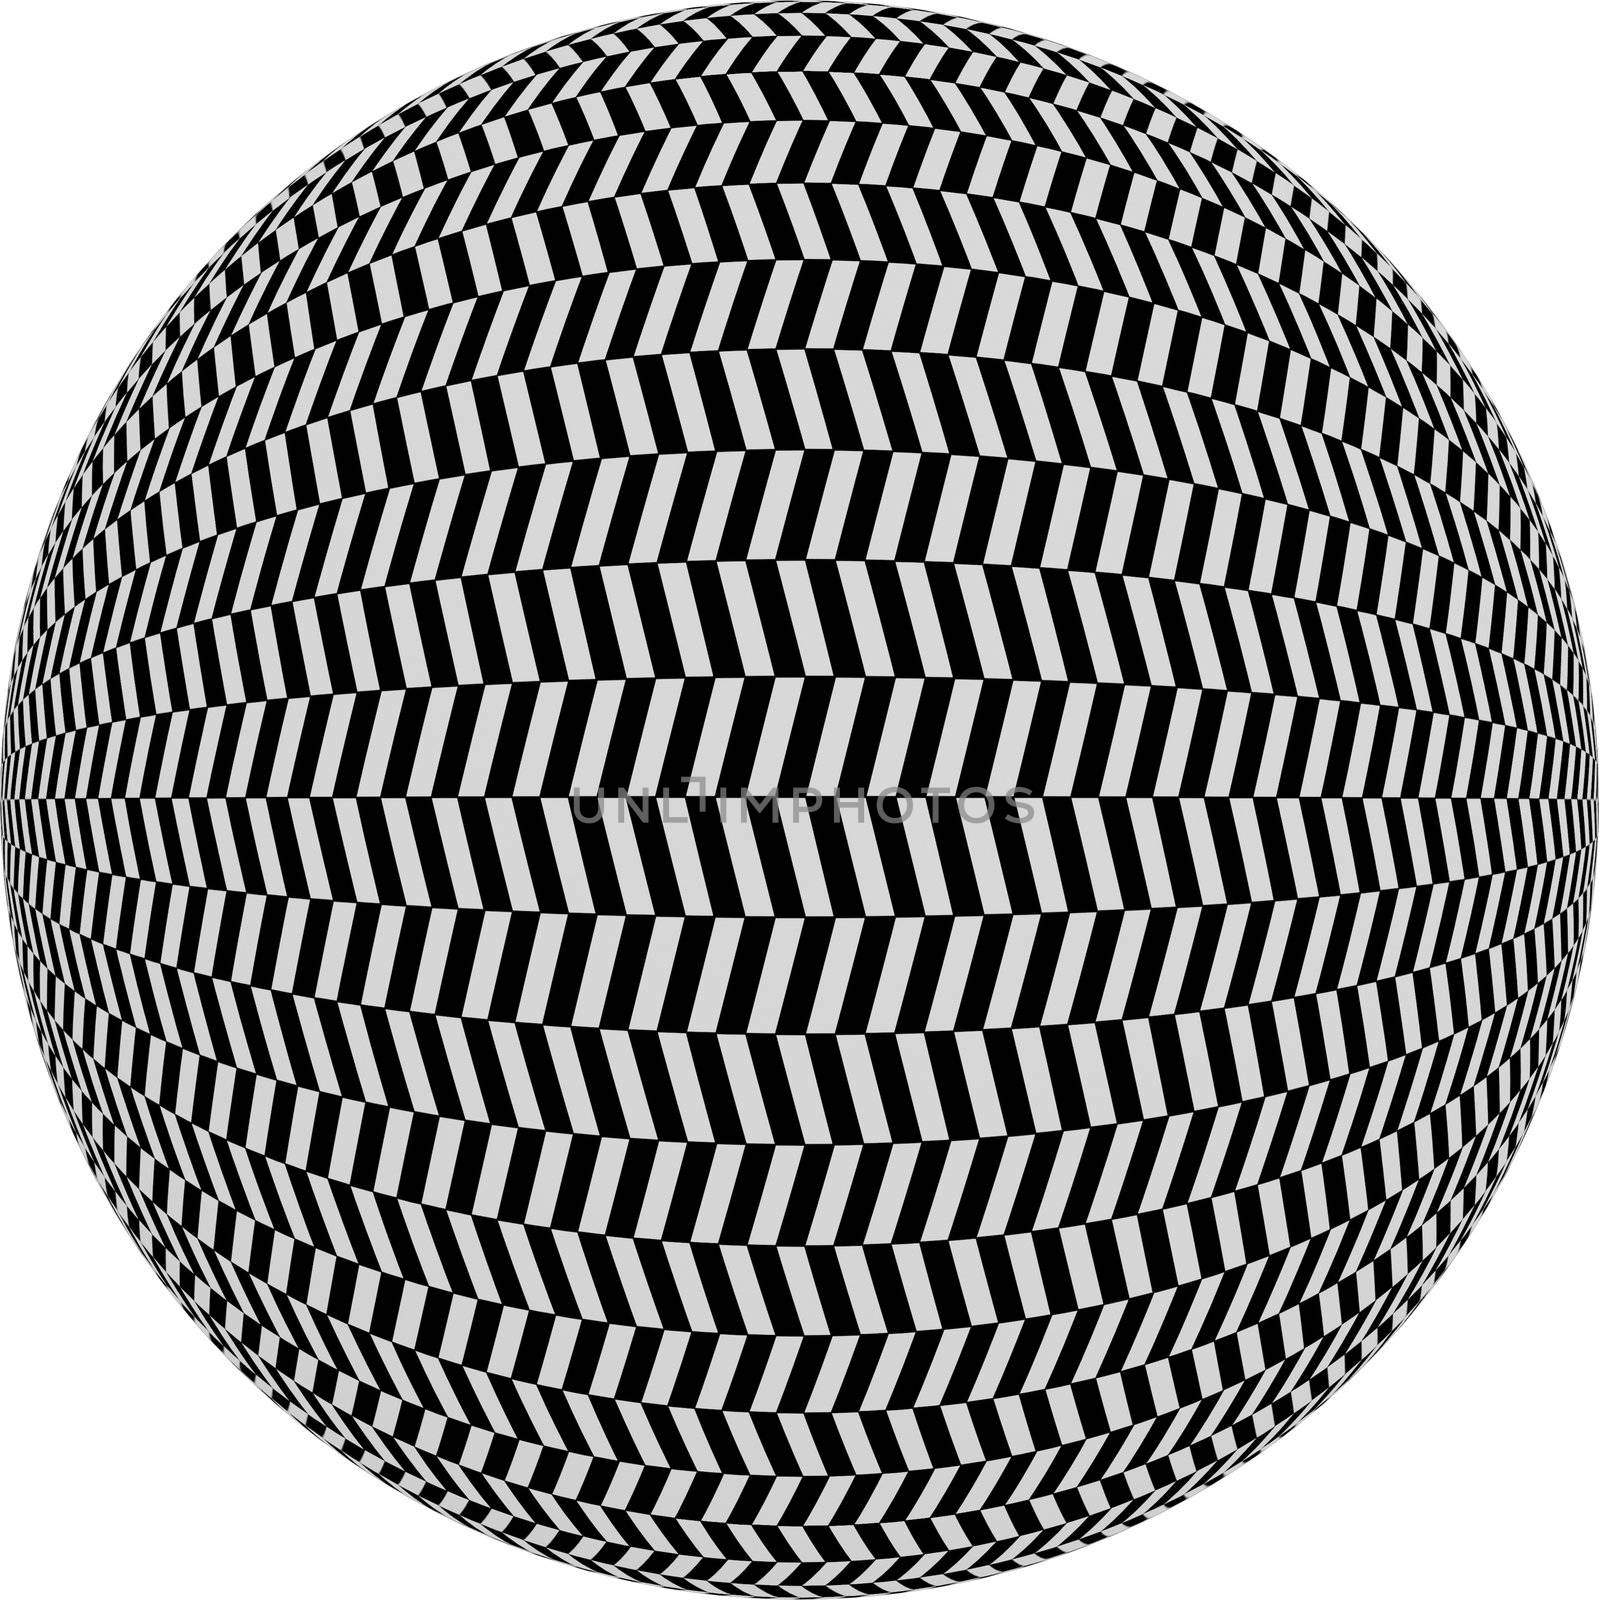 Pattern circles that are great for backgrounds and design inspiration. Has a white background.